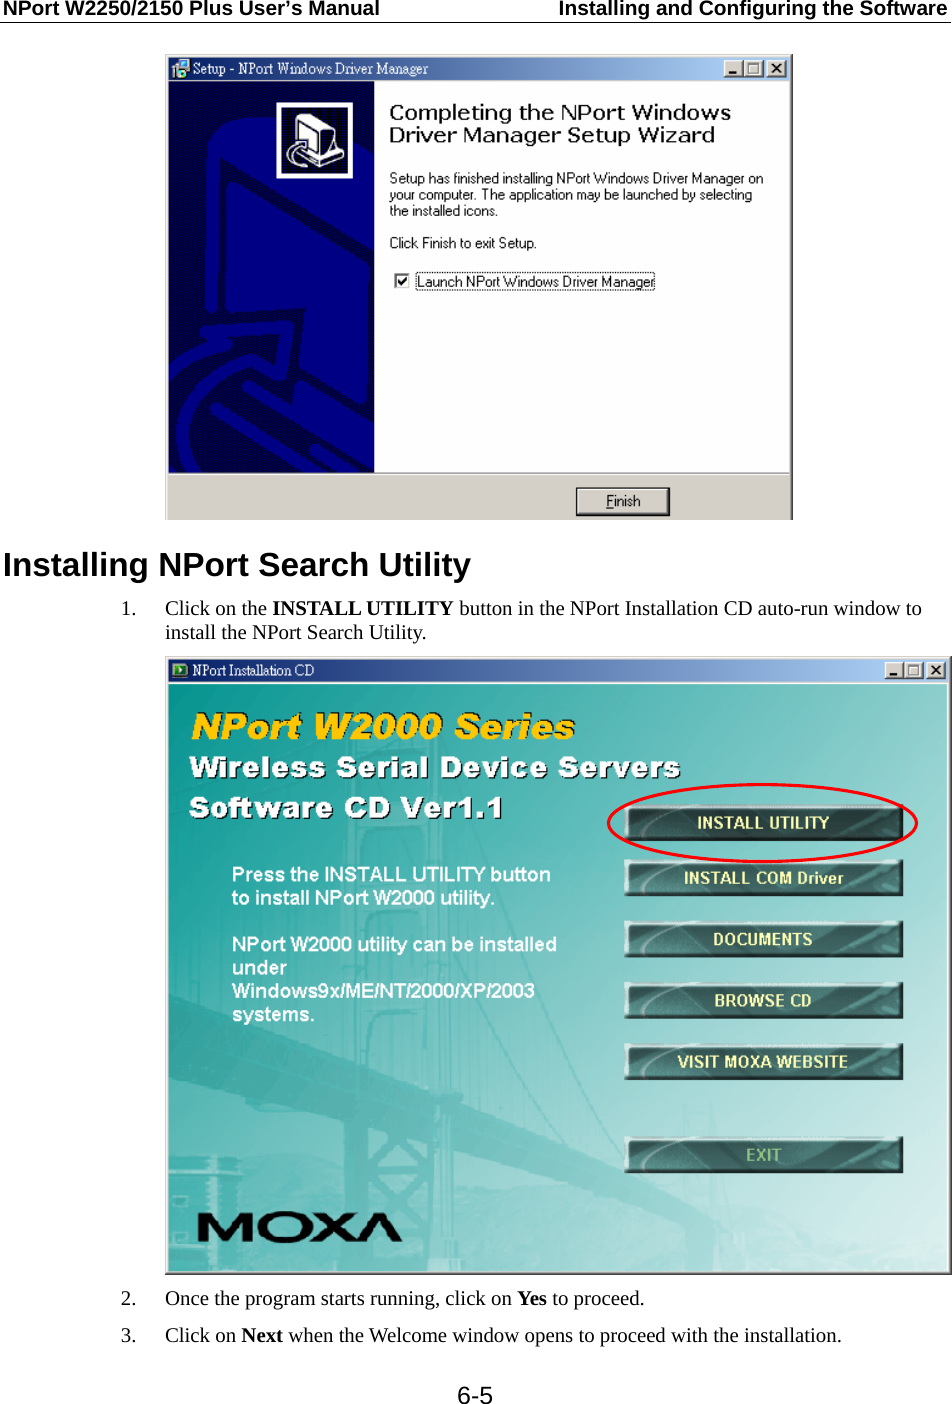 NPort W2250/2150 Plus User’s Manual  Installing and Configuring the Software  6-5 Installing NPort Search Utility 1. Click on the INSTALL UTILITY button in the NPort Installation CD auto-run window to install the NPort Search Utility.  2. Once the program starts running, click on Yes to proceed. 3. Click on Next when the Welcome window opens to proceed with the installation. 